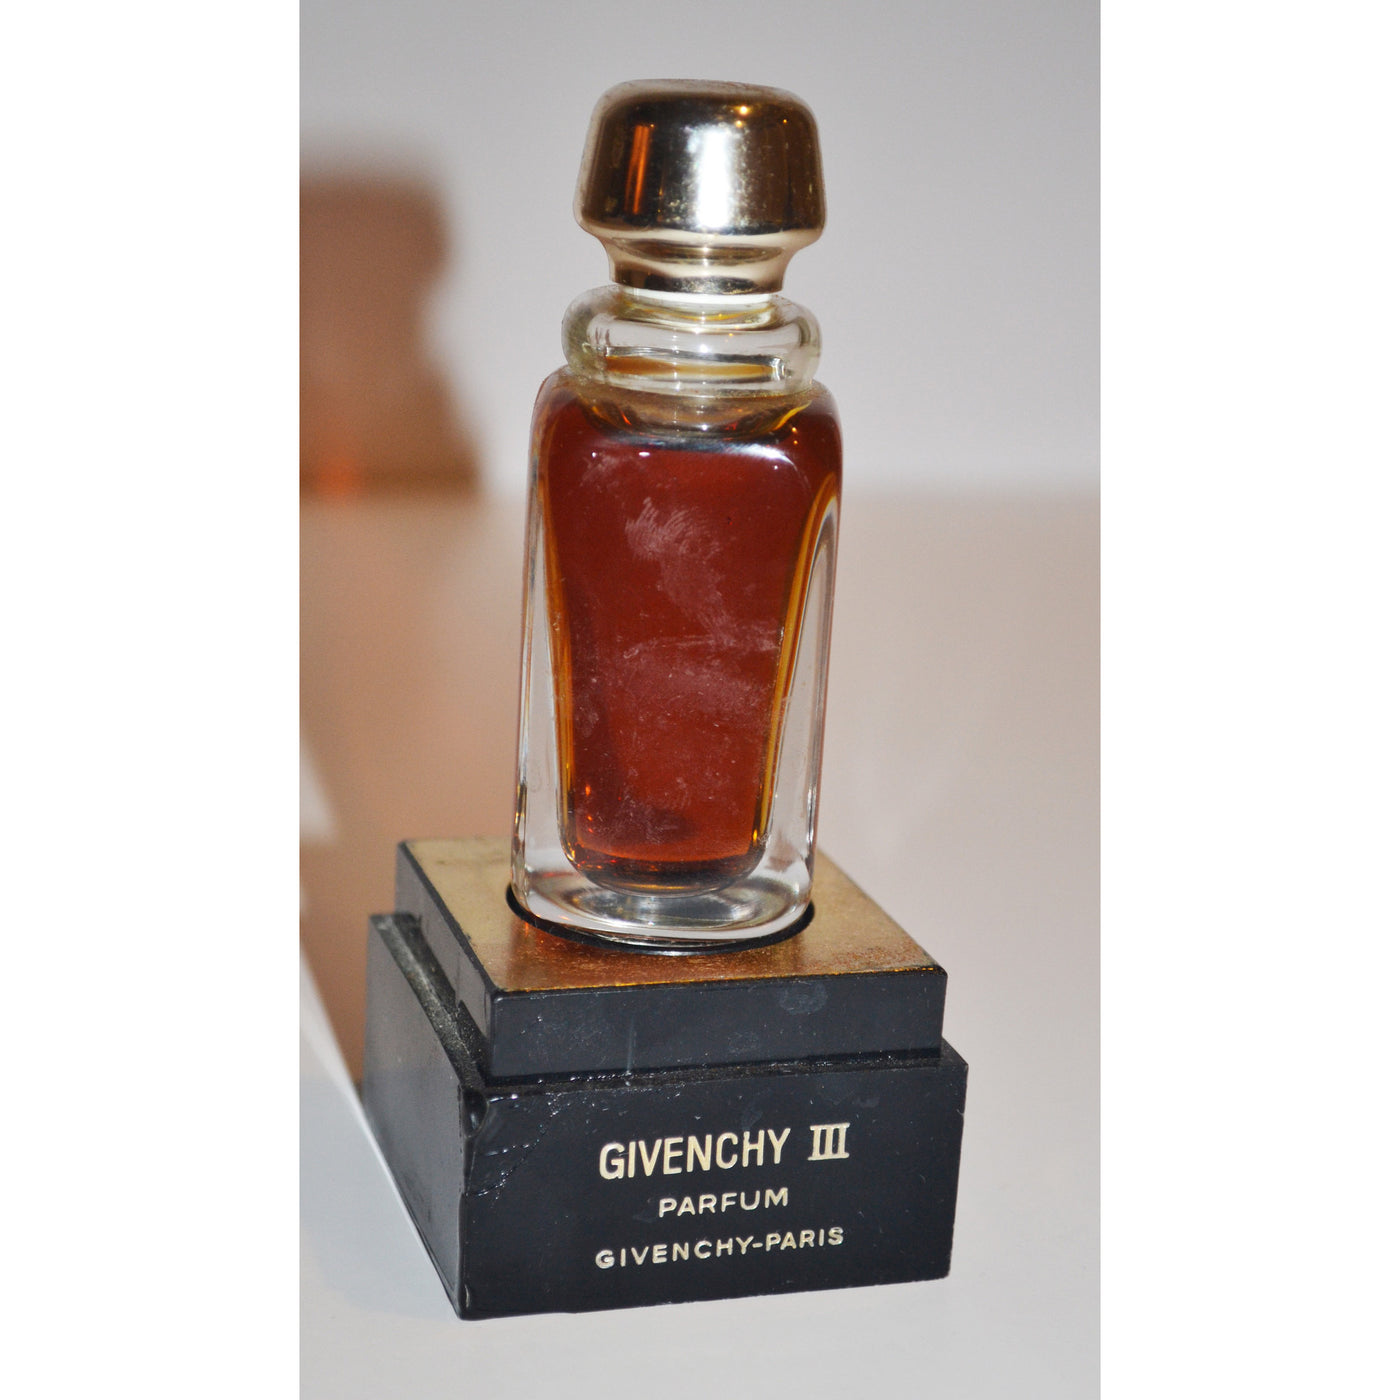 Vintage Givenchy III Parfum By Givenchy